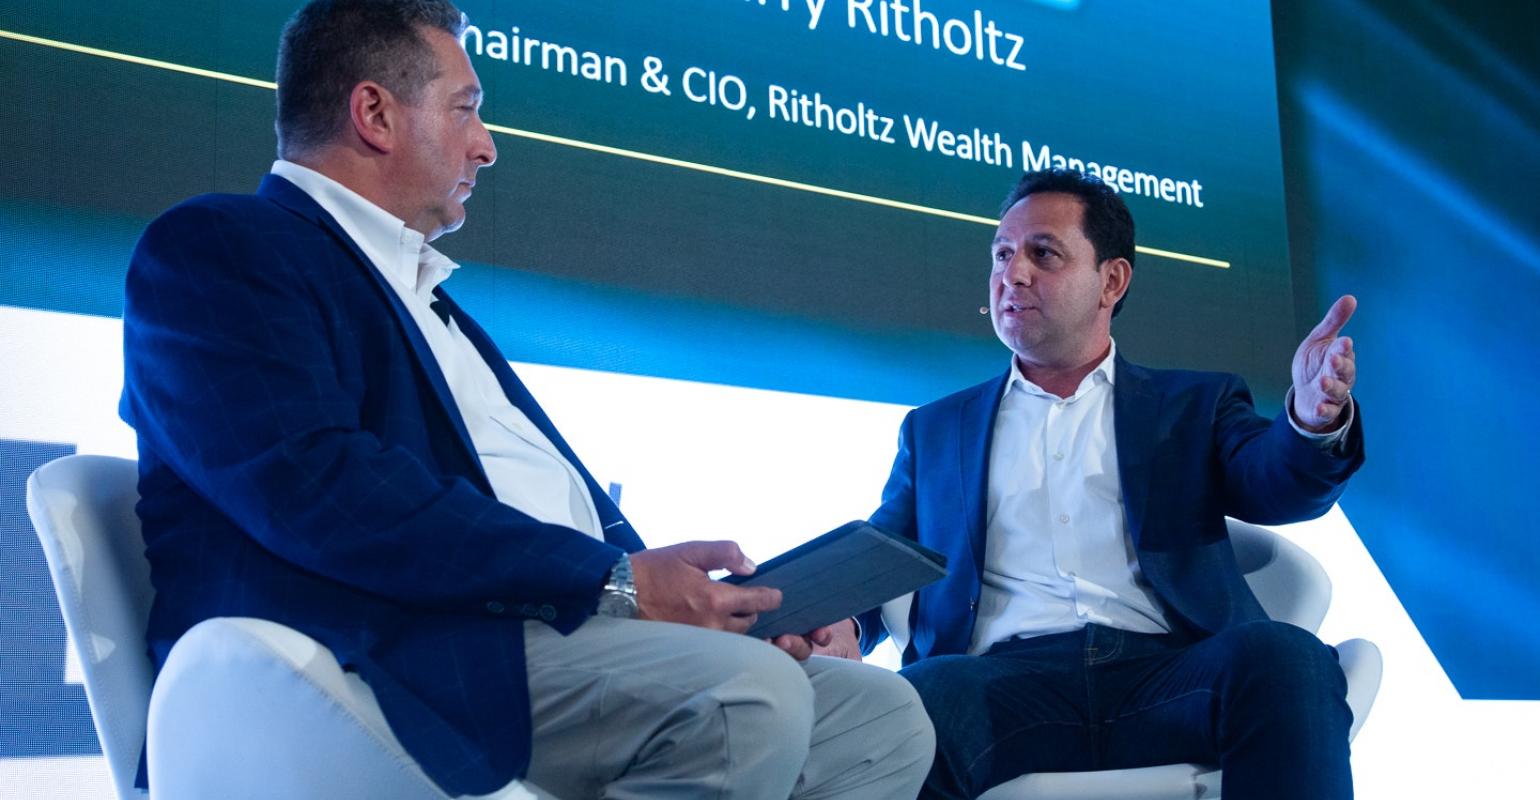 Barry Ritholtz and Peter Mallouk at Wealth/Stack